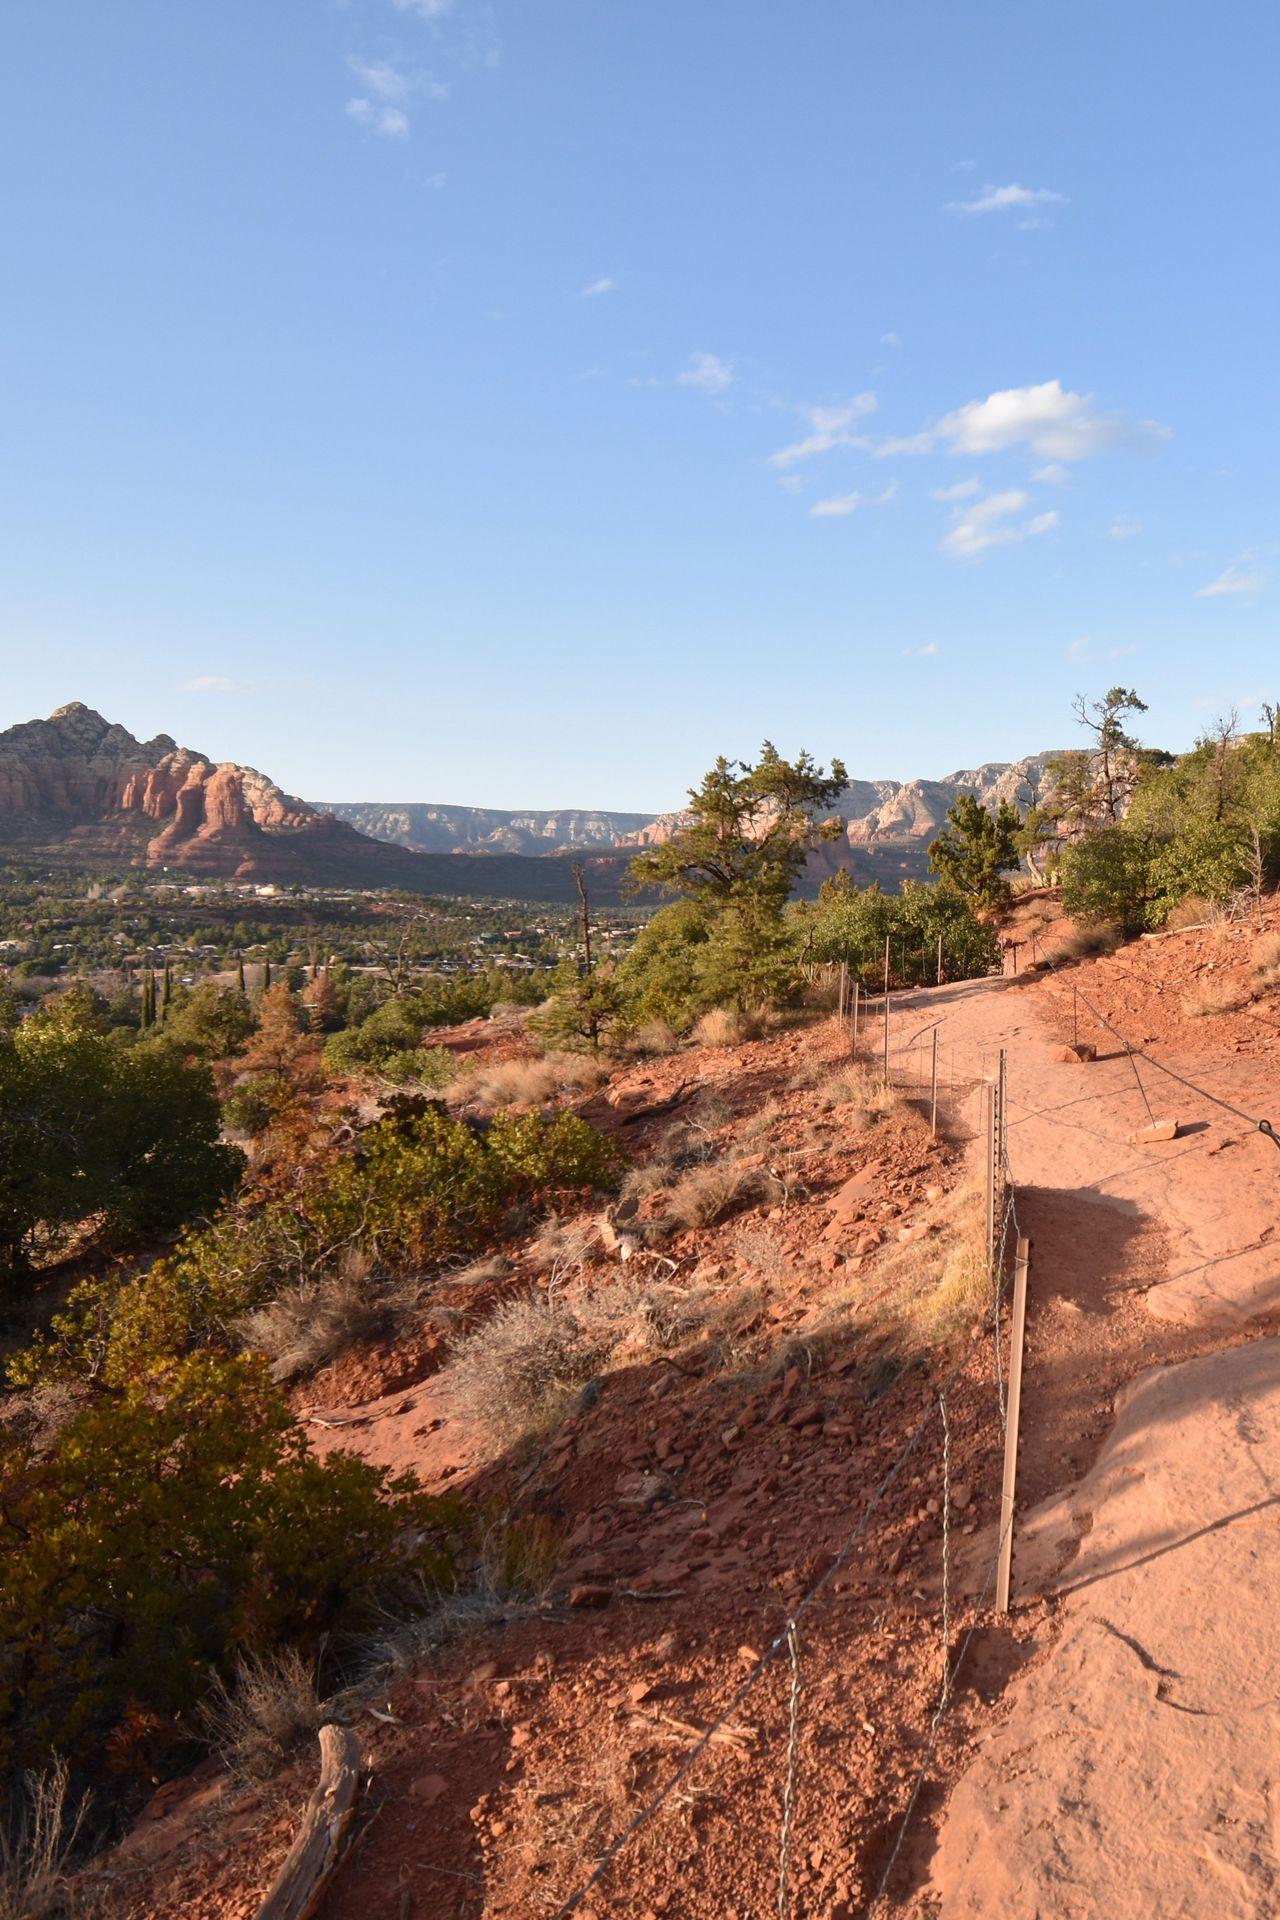 A trail leading to Airport Mesa. There is a railing along the orange rock path.